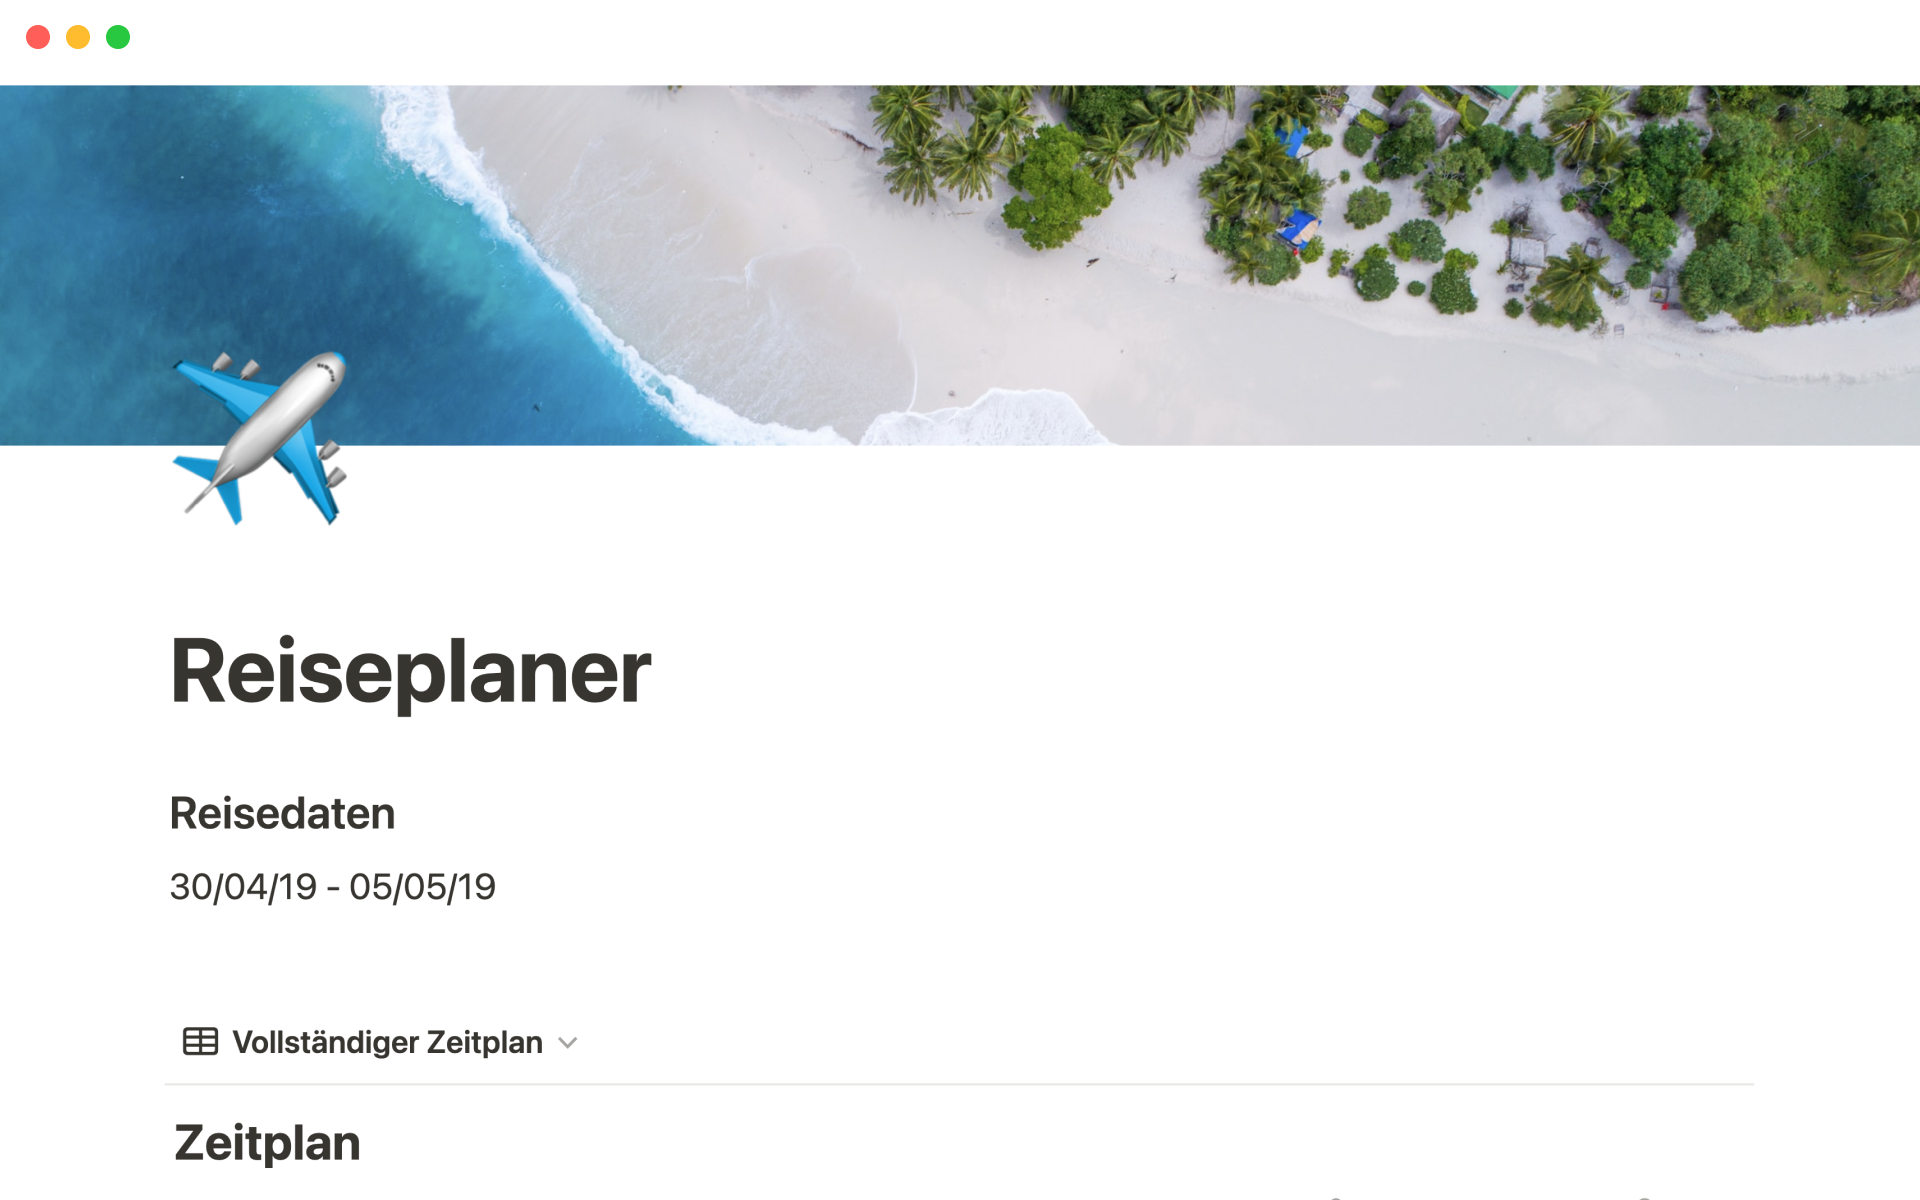 The desktop image for the Travel planning template